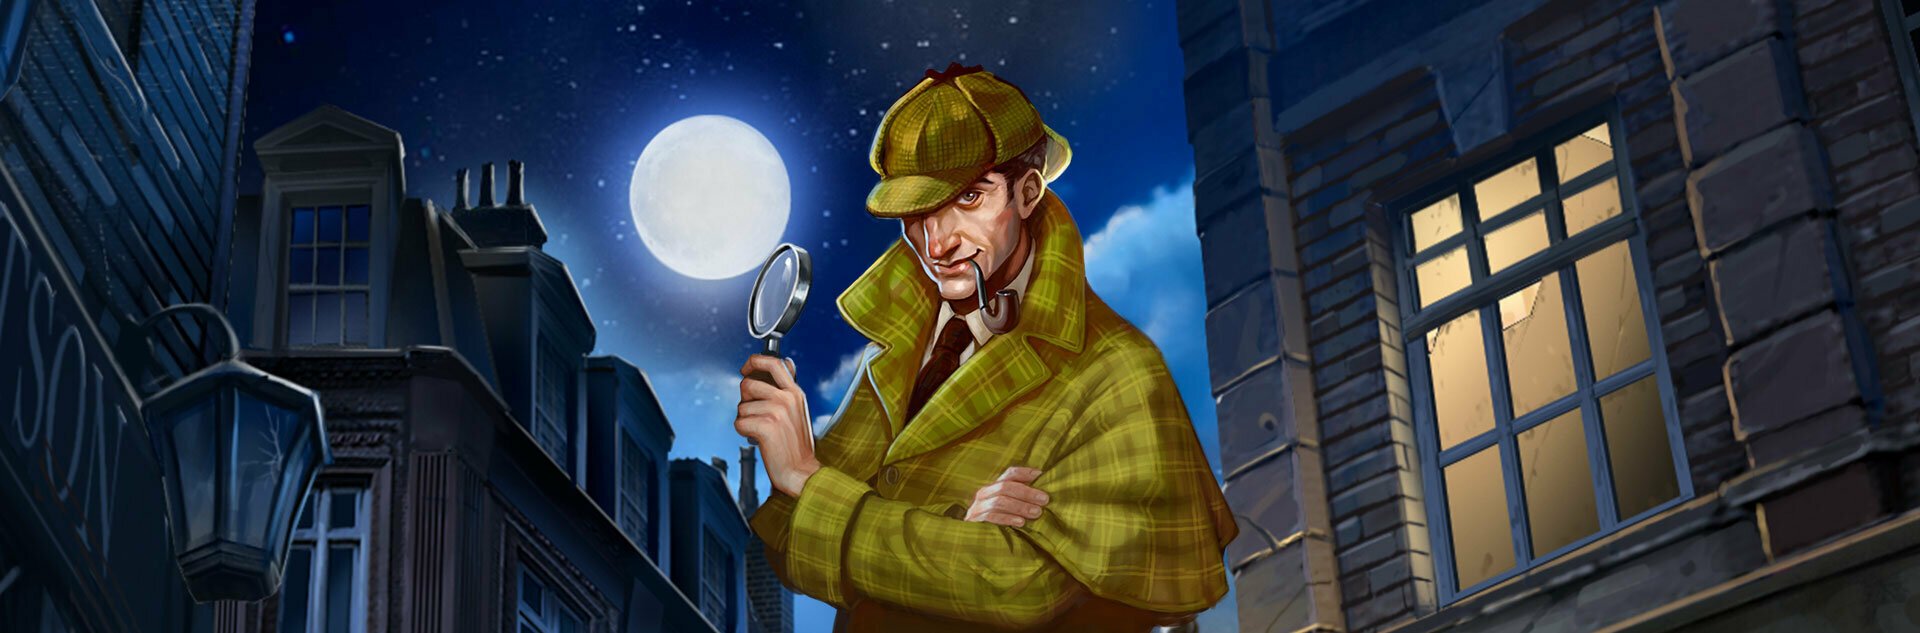 Play Riddle Reels - A Case of Riches Free Slot